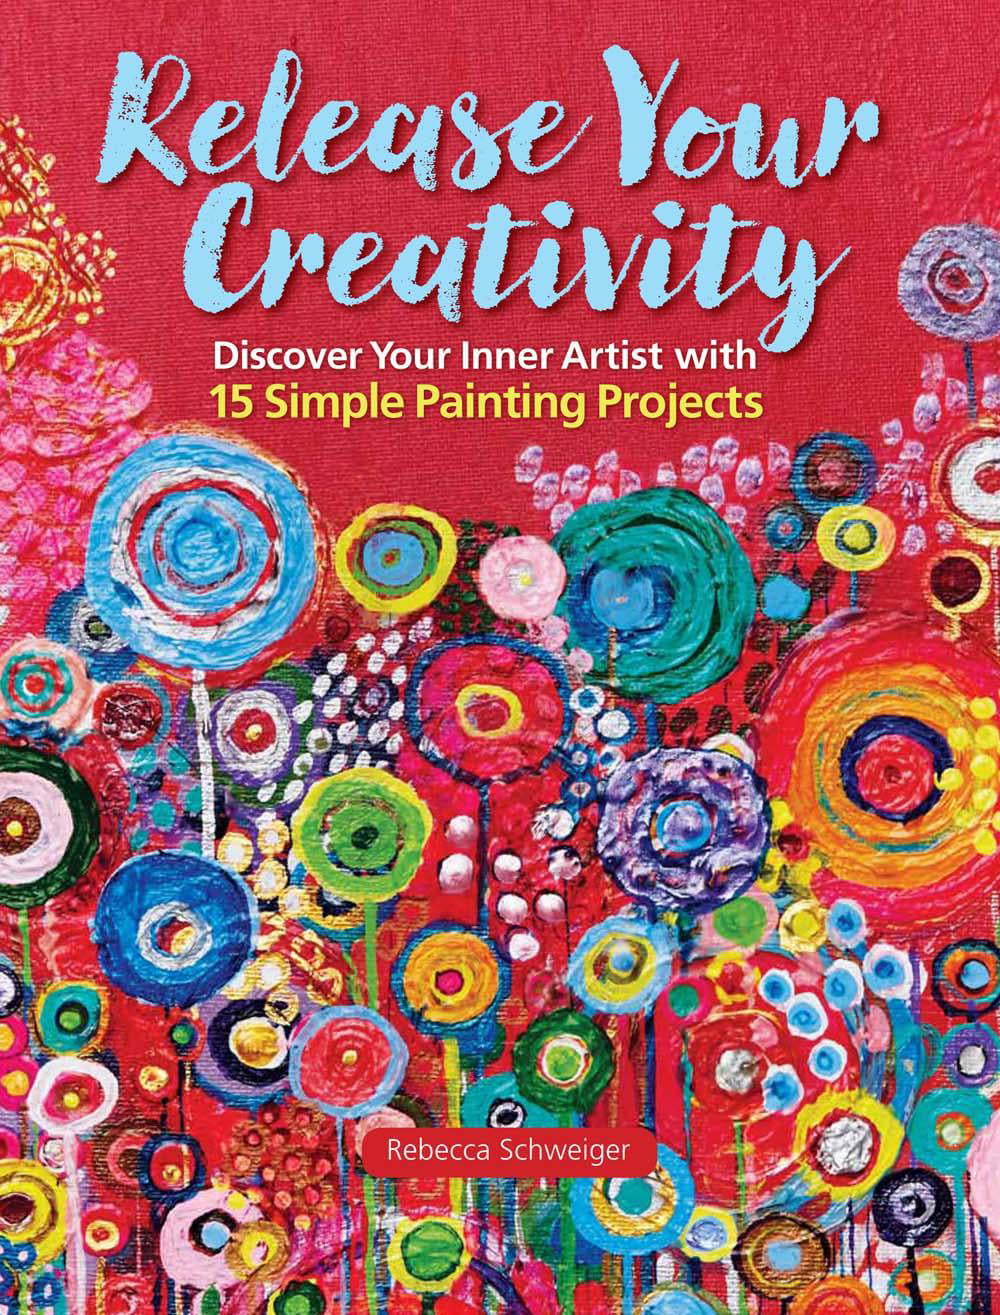 Release-Your-Creativity-Discover-Your-Inner-Artist-with-15-Simple-Painting-Projects